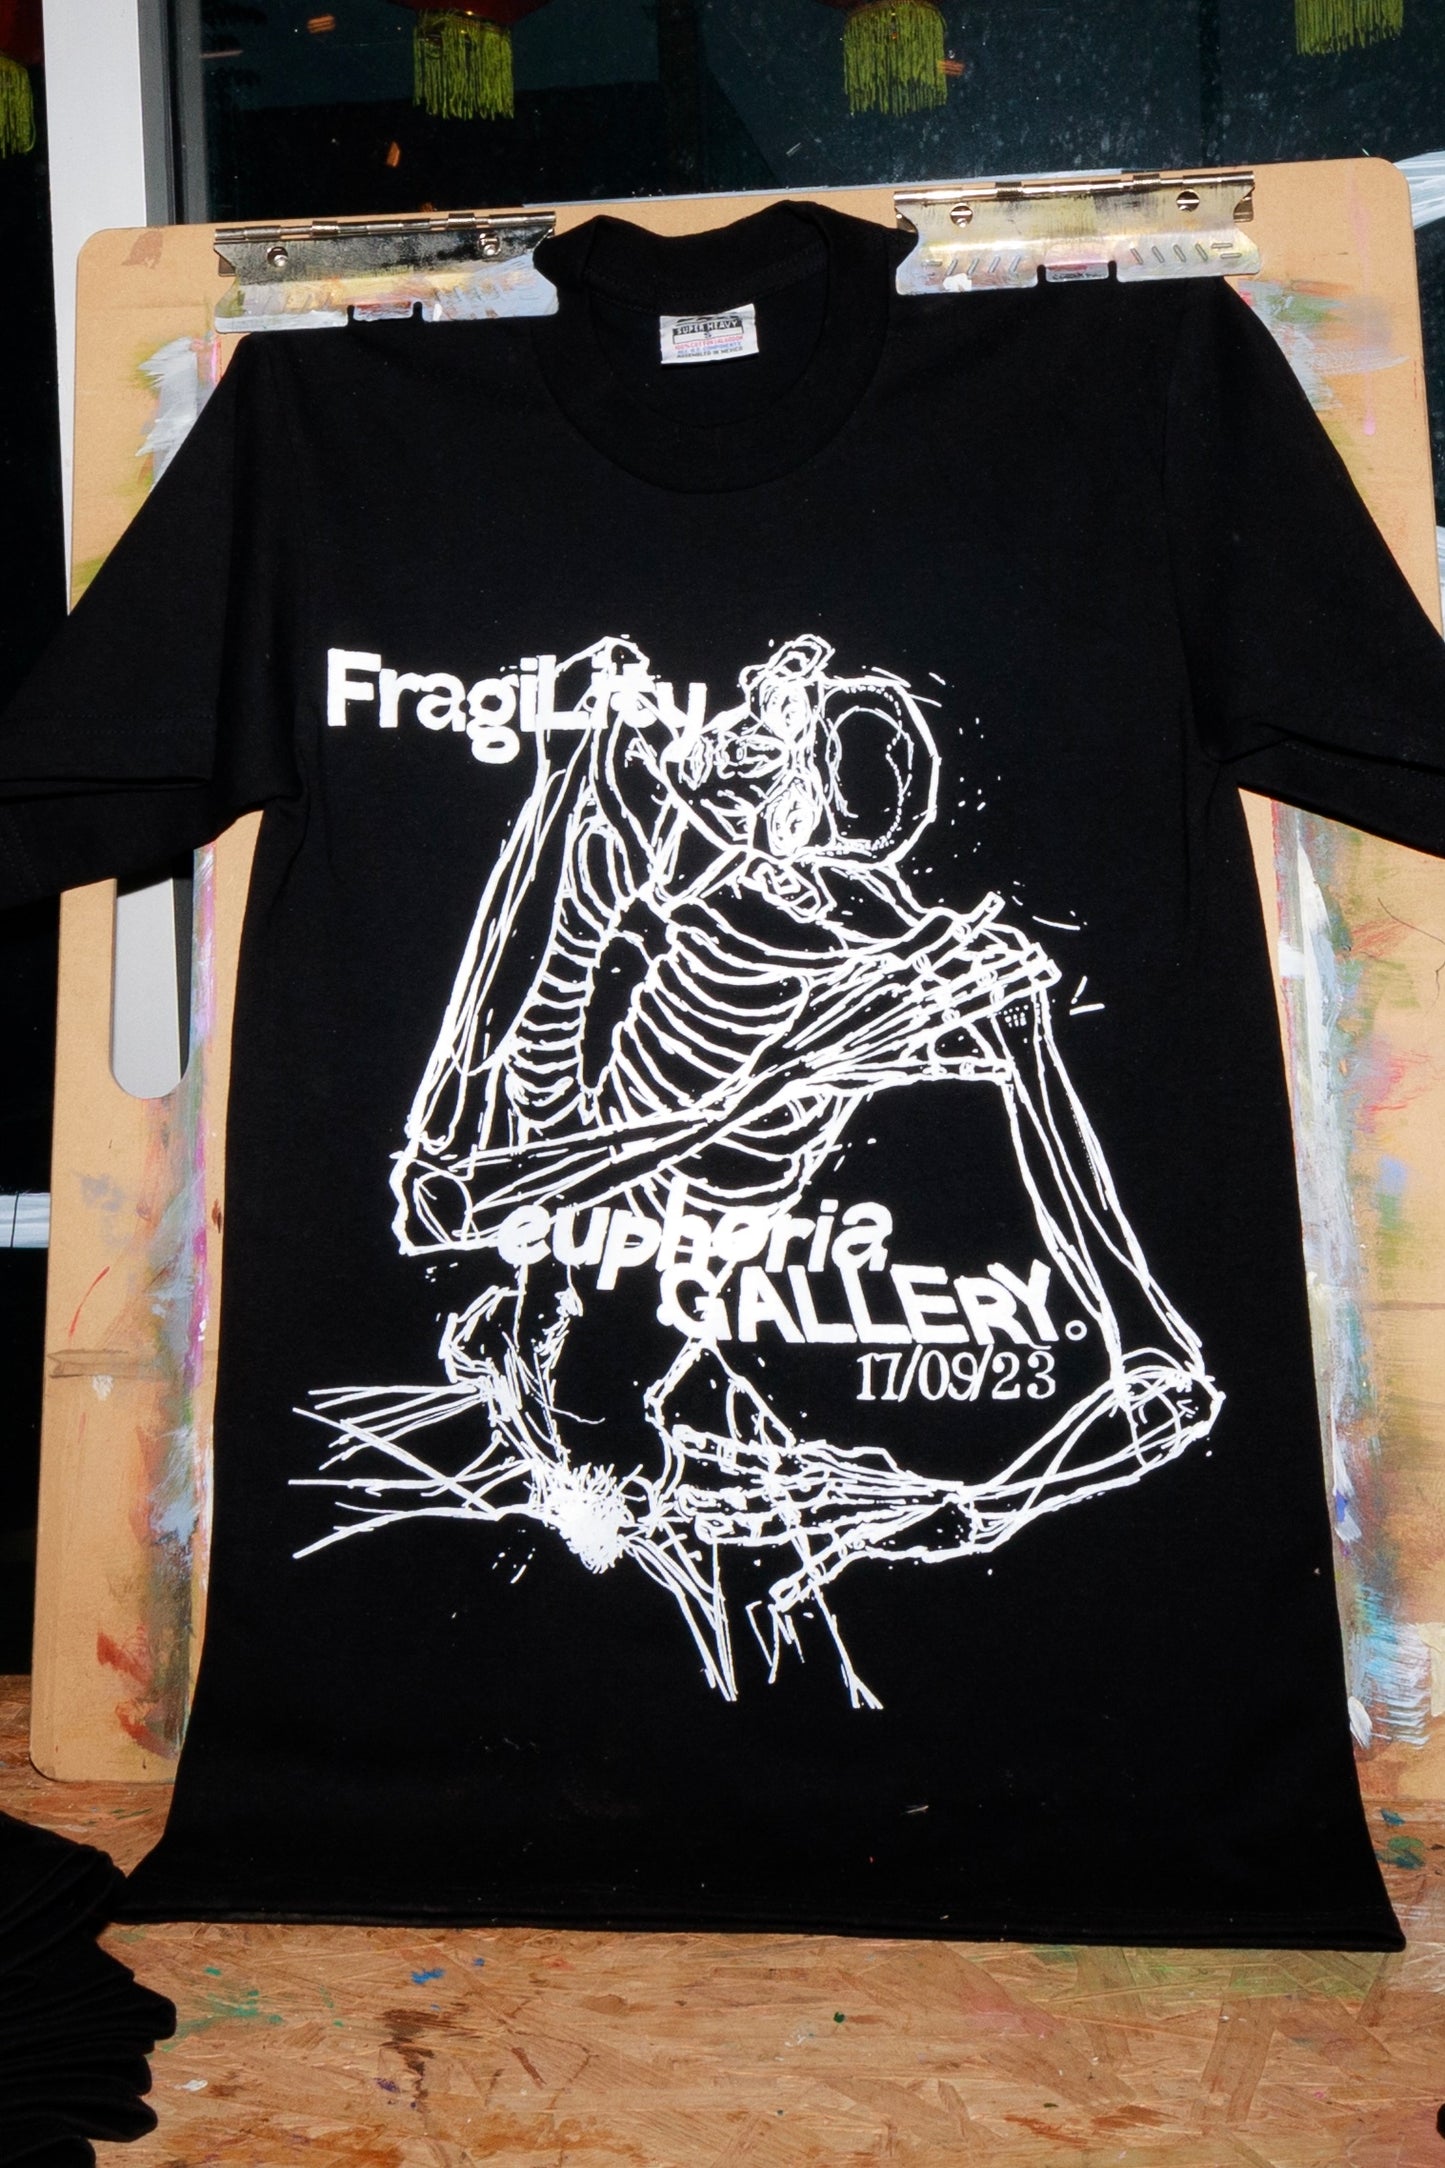 Fragility X Euphoria Gallery t-shIRT (Limited edition)